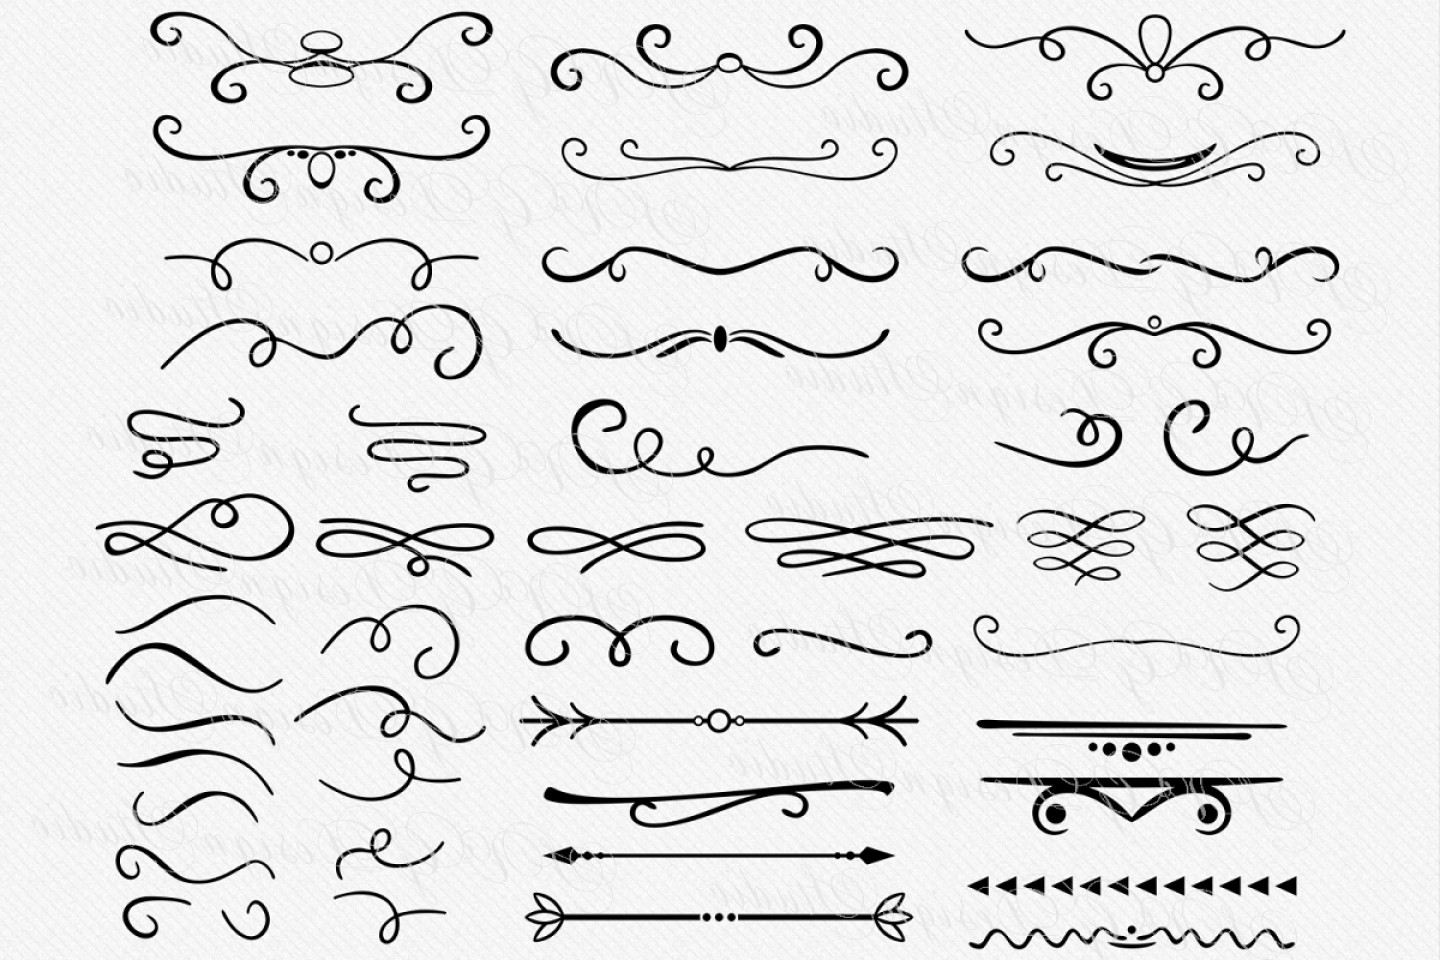 Download Swirl Divider Vector at Vectorified.com | Collection of ...